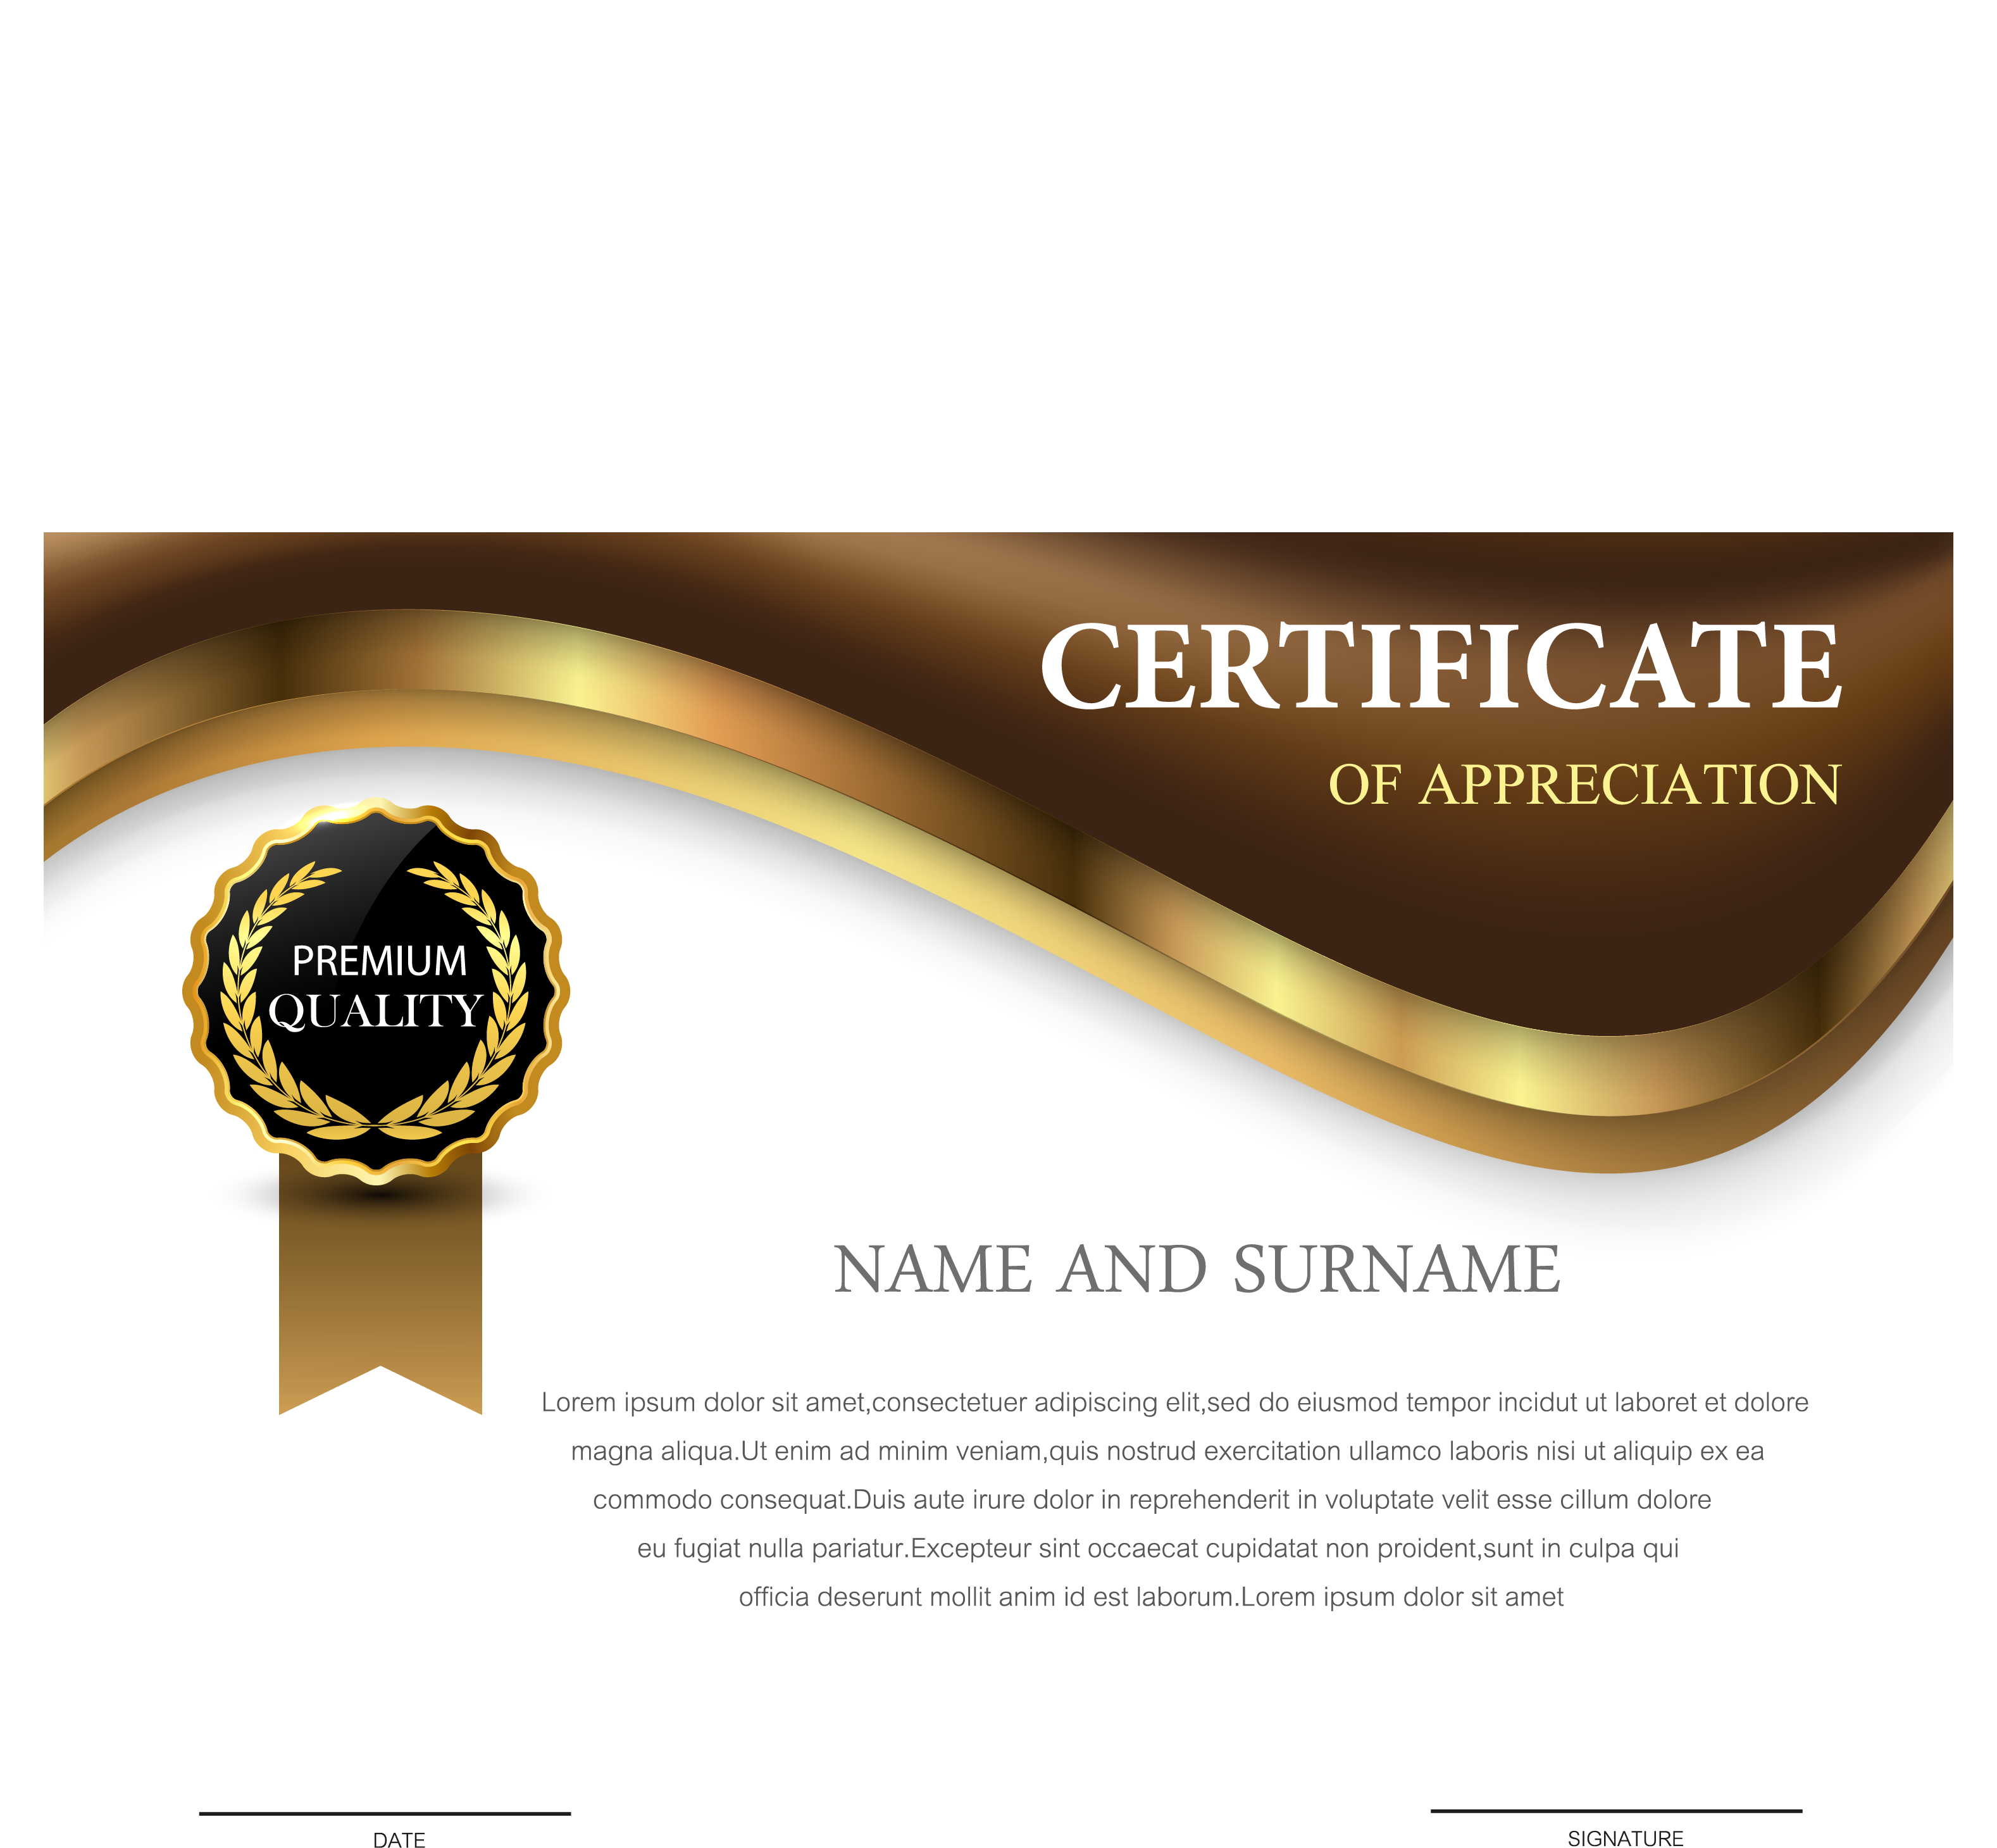 certificate-of-appreciation-png-free-logo-image